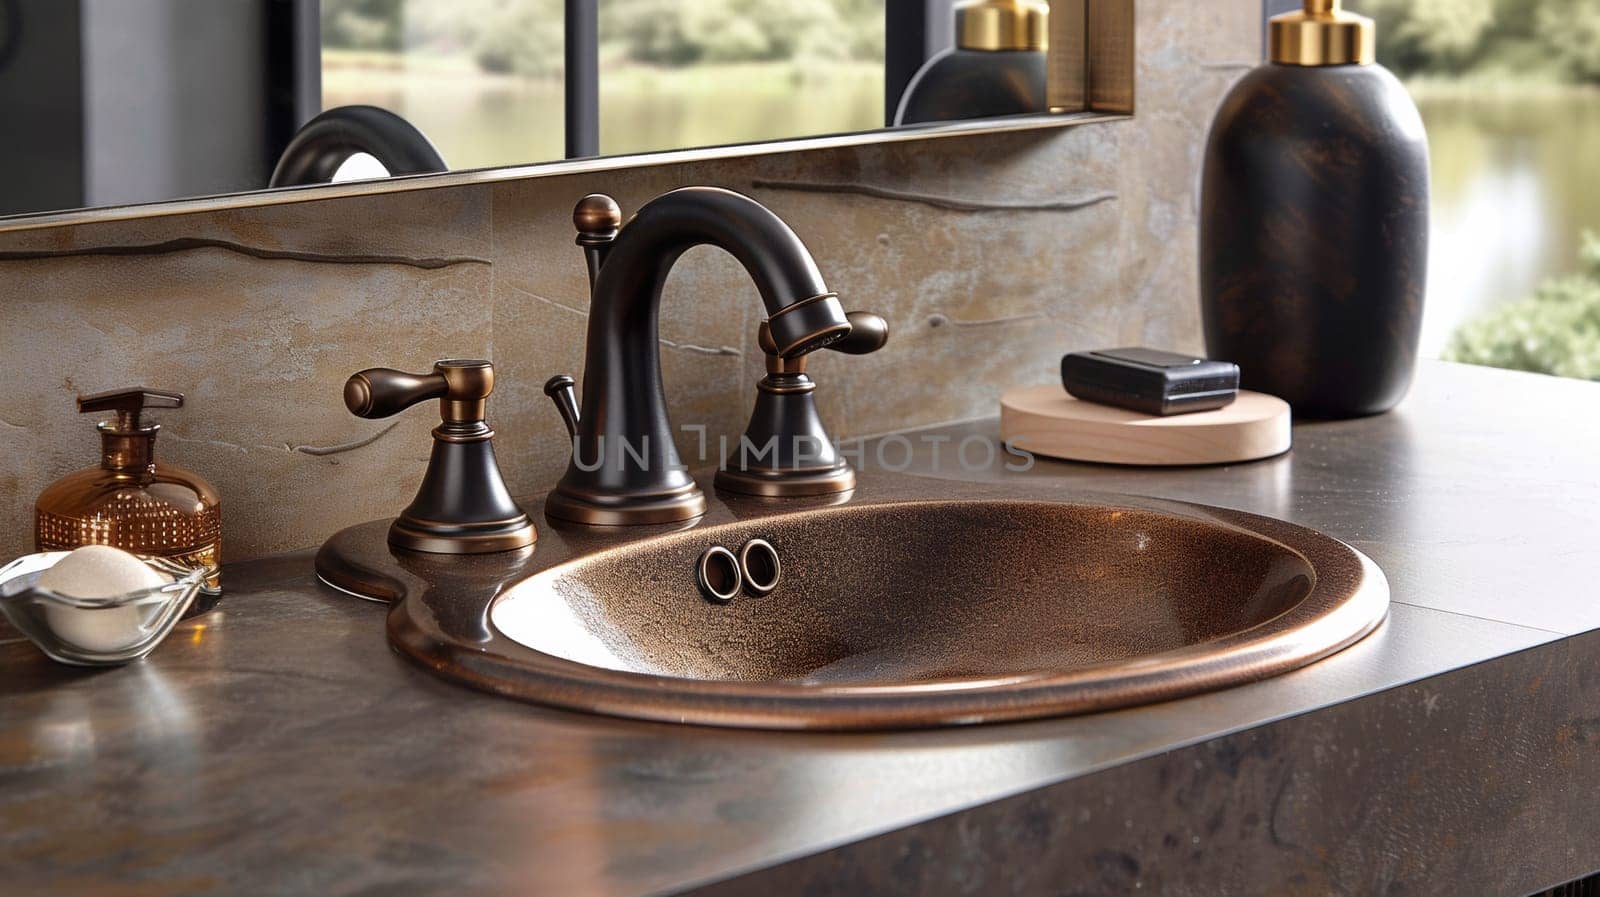 A bathroom sink with a copper finish and soap dispenser, AI by starush